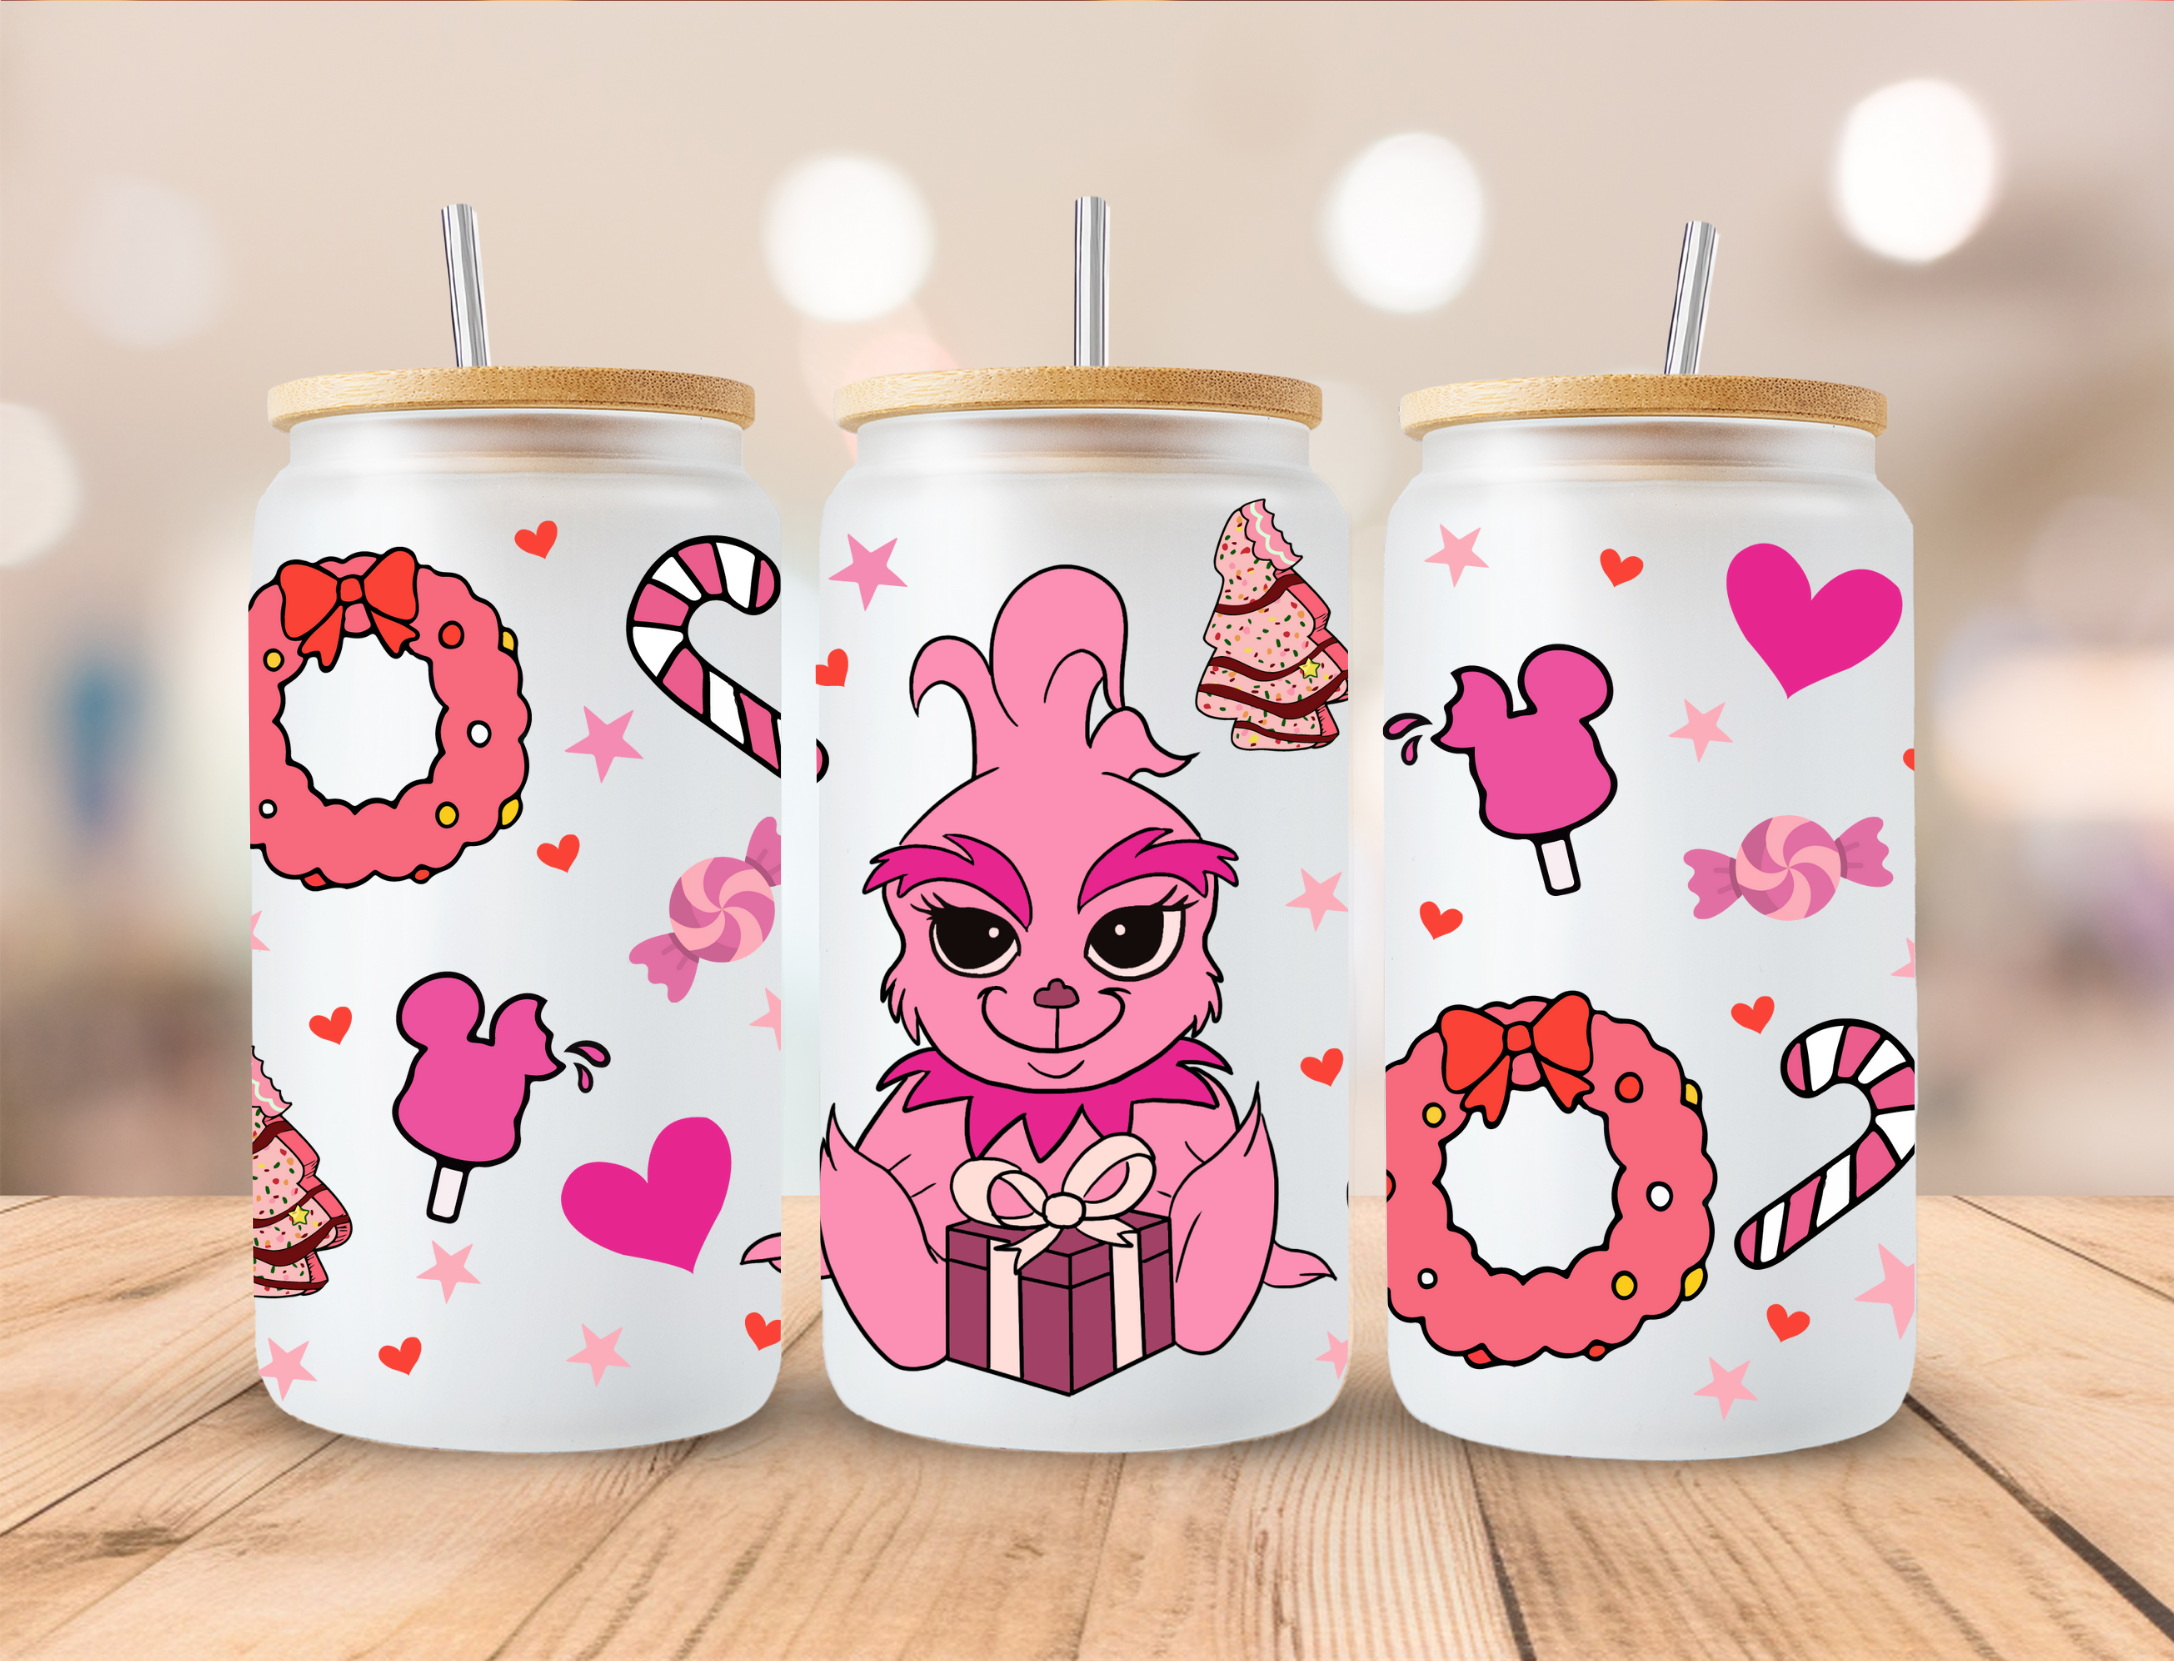 Pink & Red Strawberries - 16oz UVDTF Cup Wrap – Funny Bunny Transfers